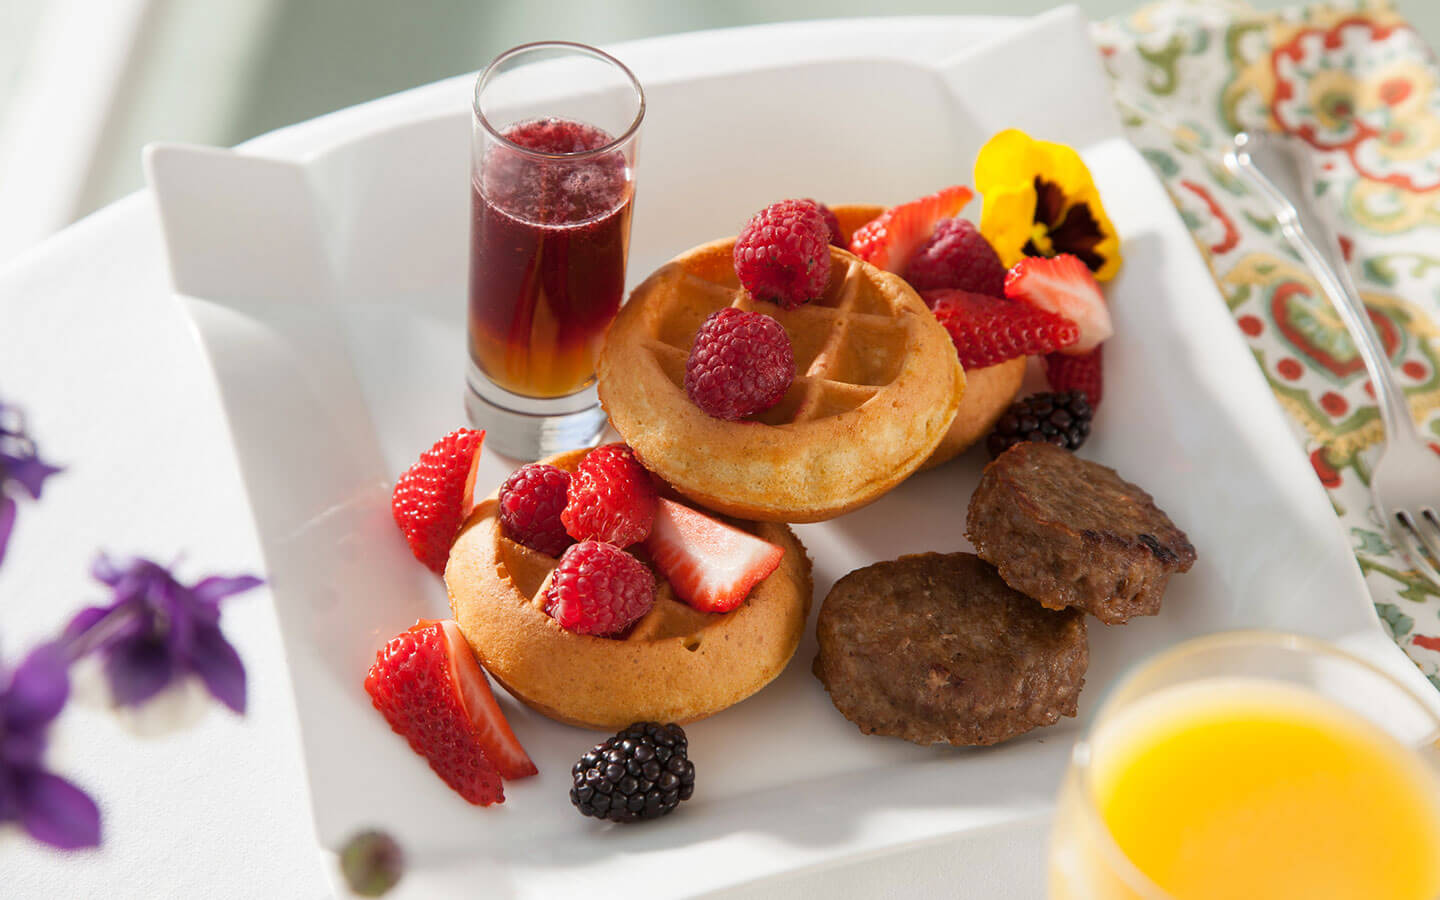 Waffles, sausage, and fresh fruit at our romantic Virginia bed and breakfast